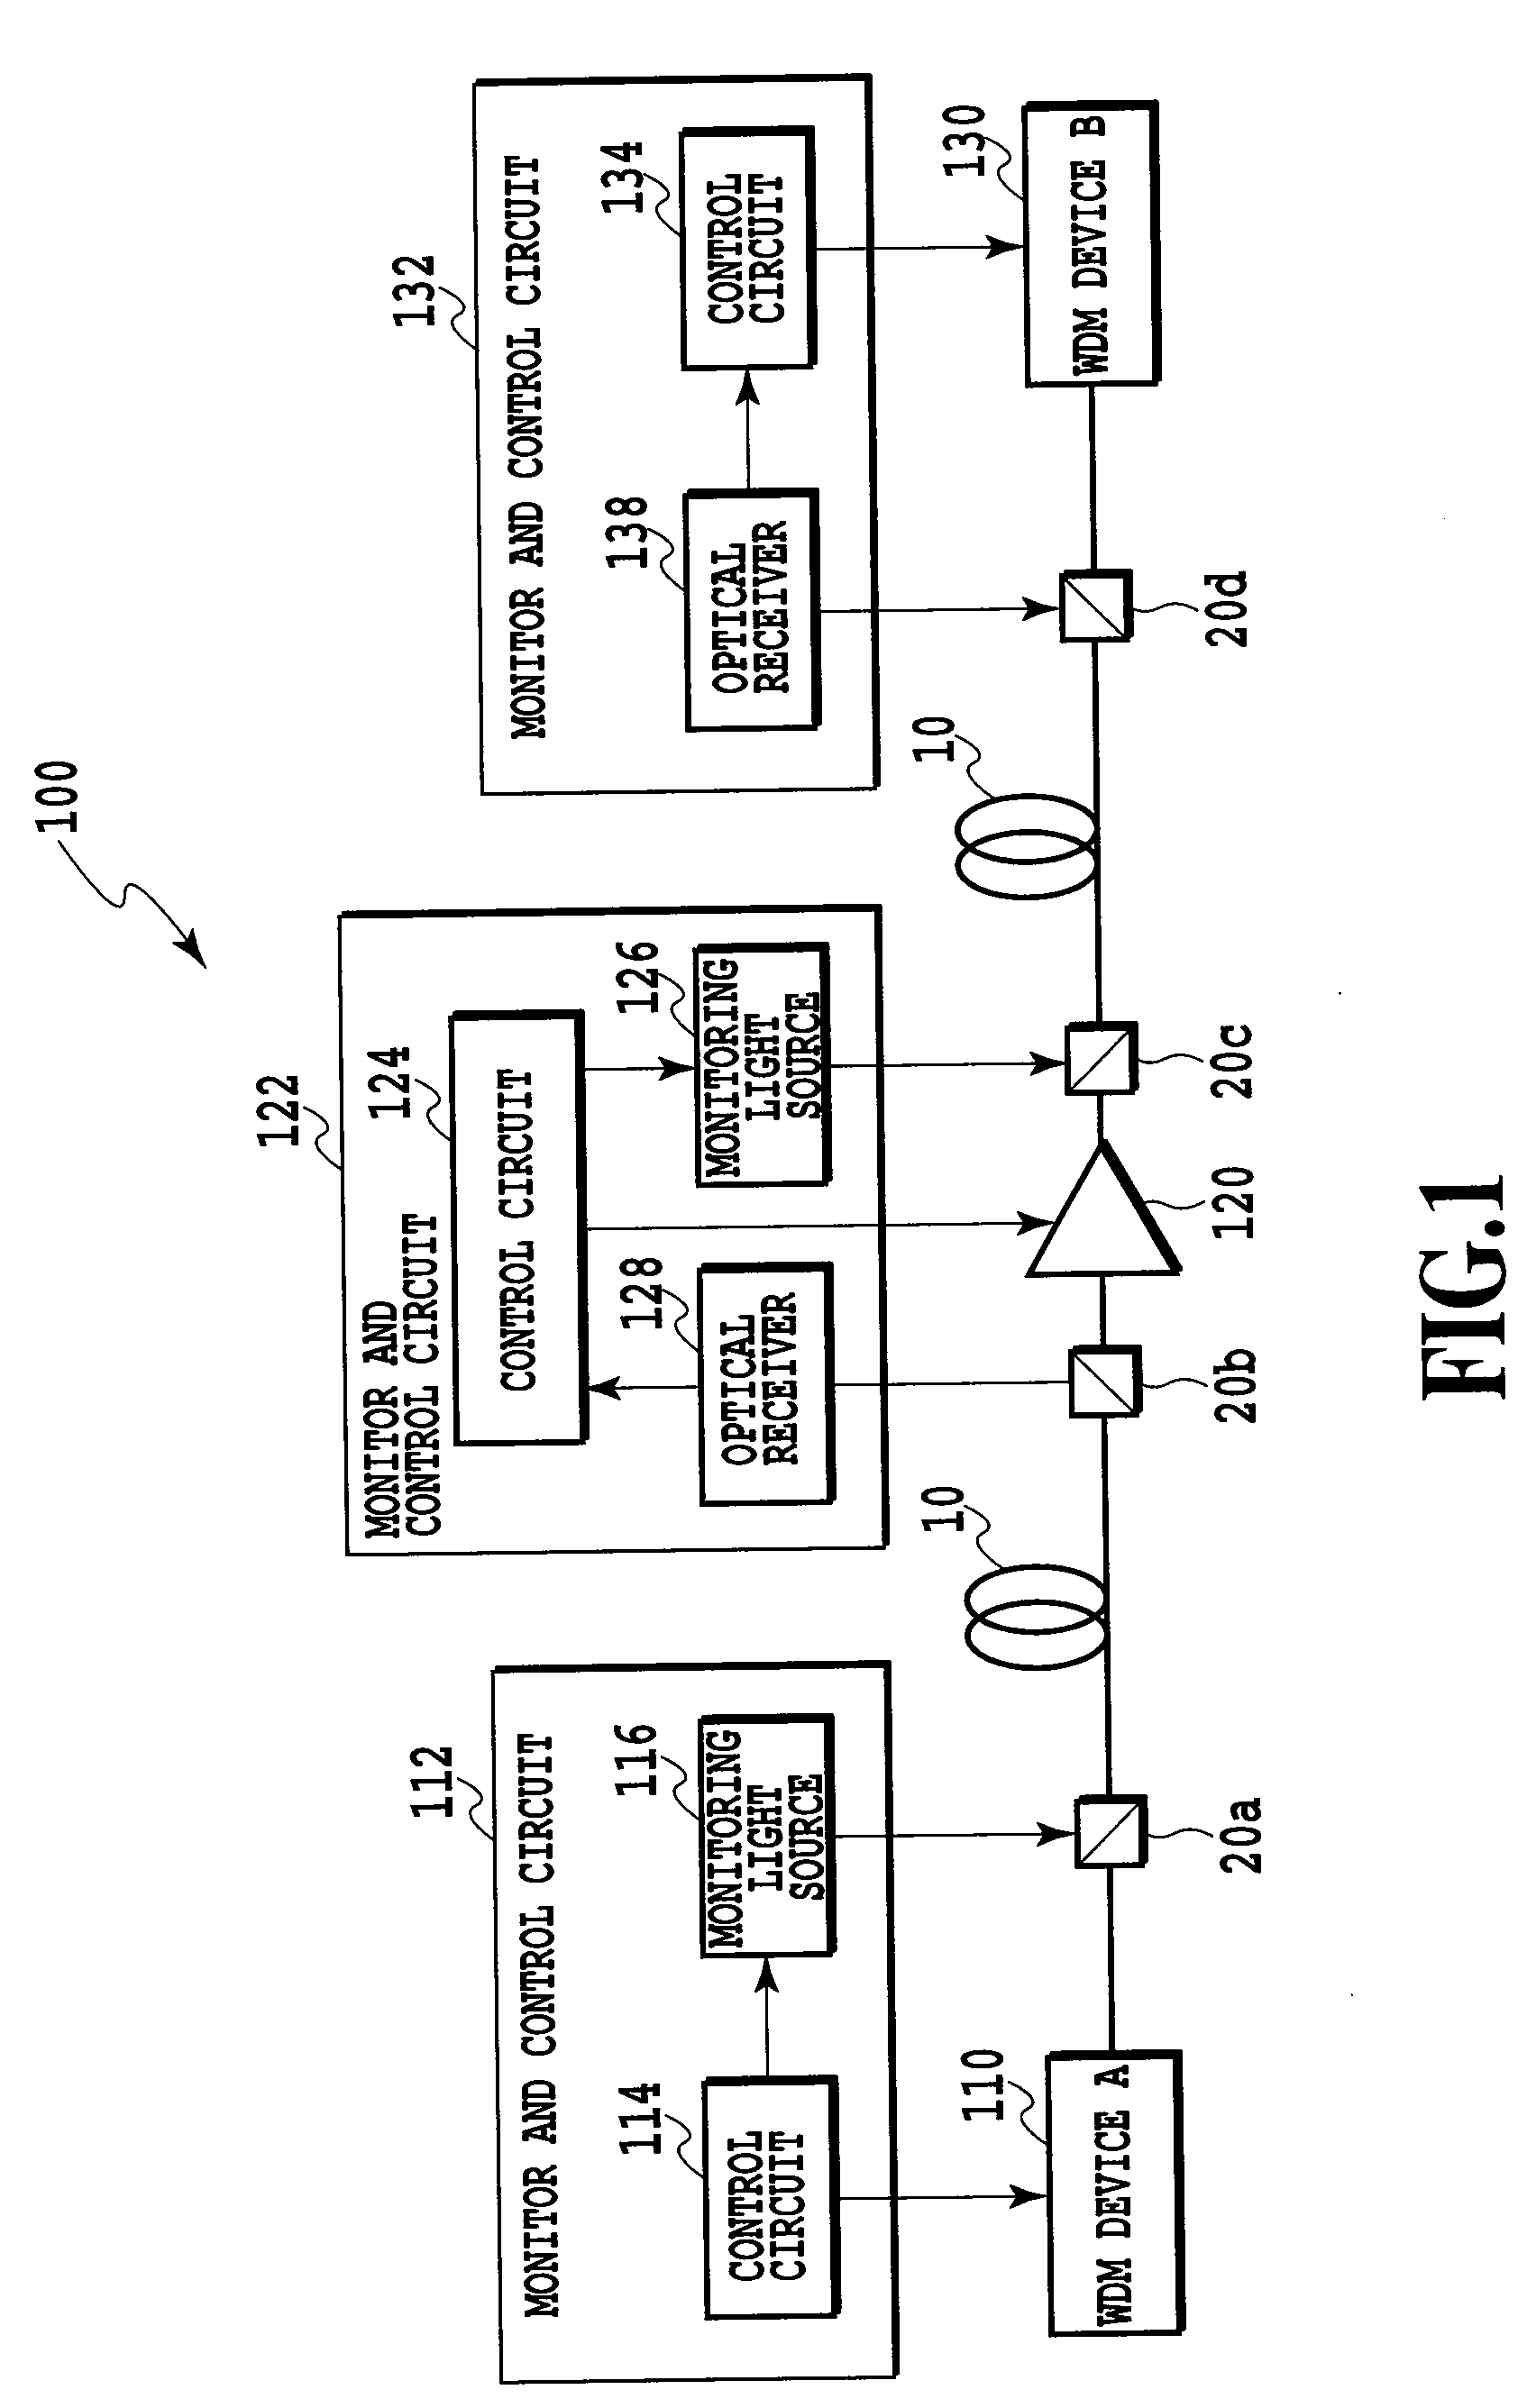 Optical wavelength multiplexing access system